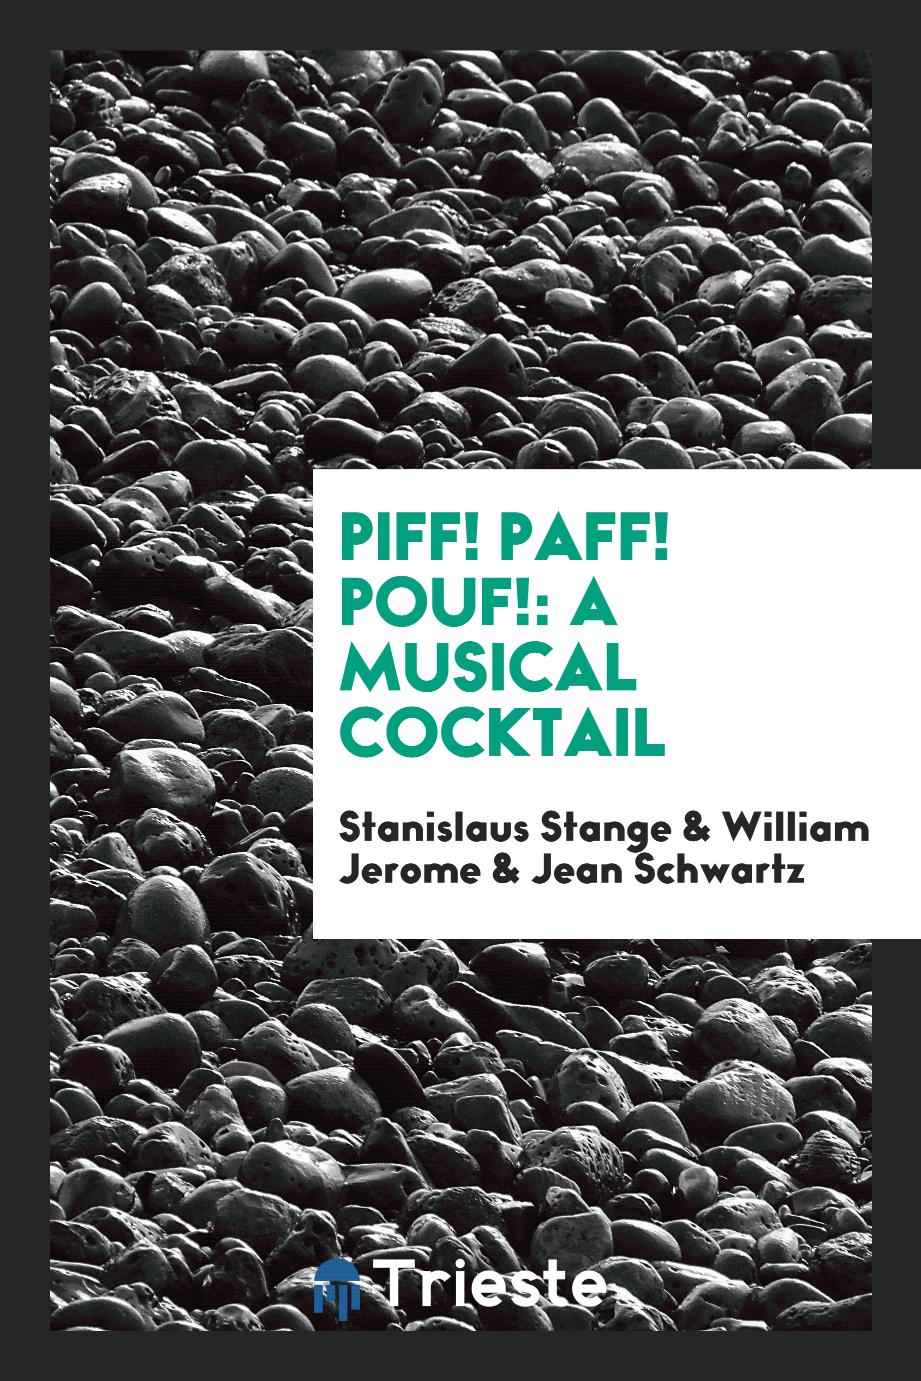 Piff! Paff! Pouf!: A Musical Cocktail